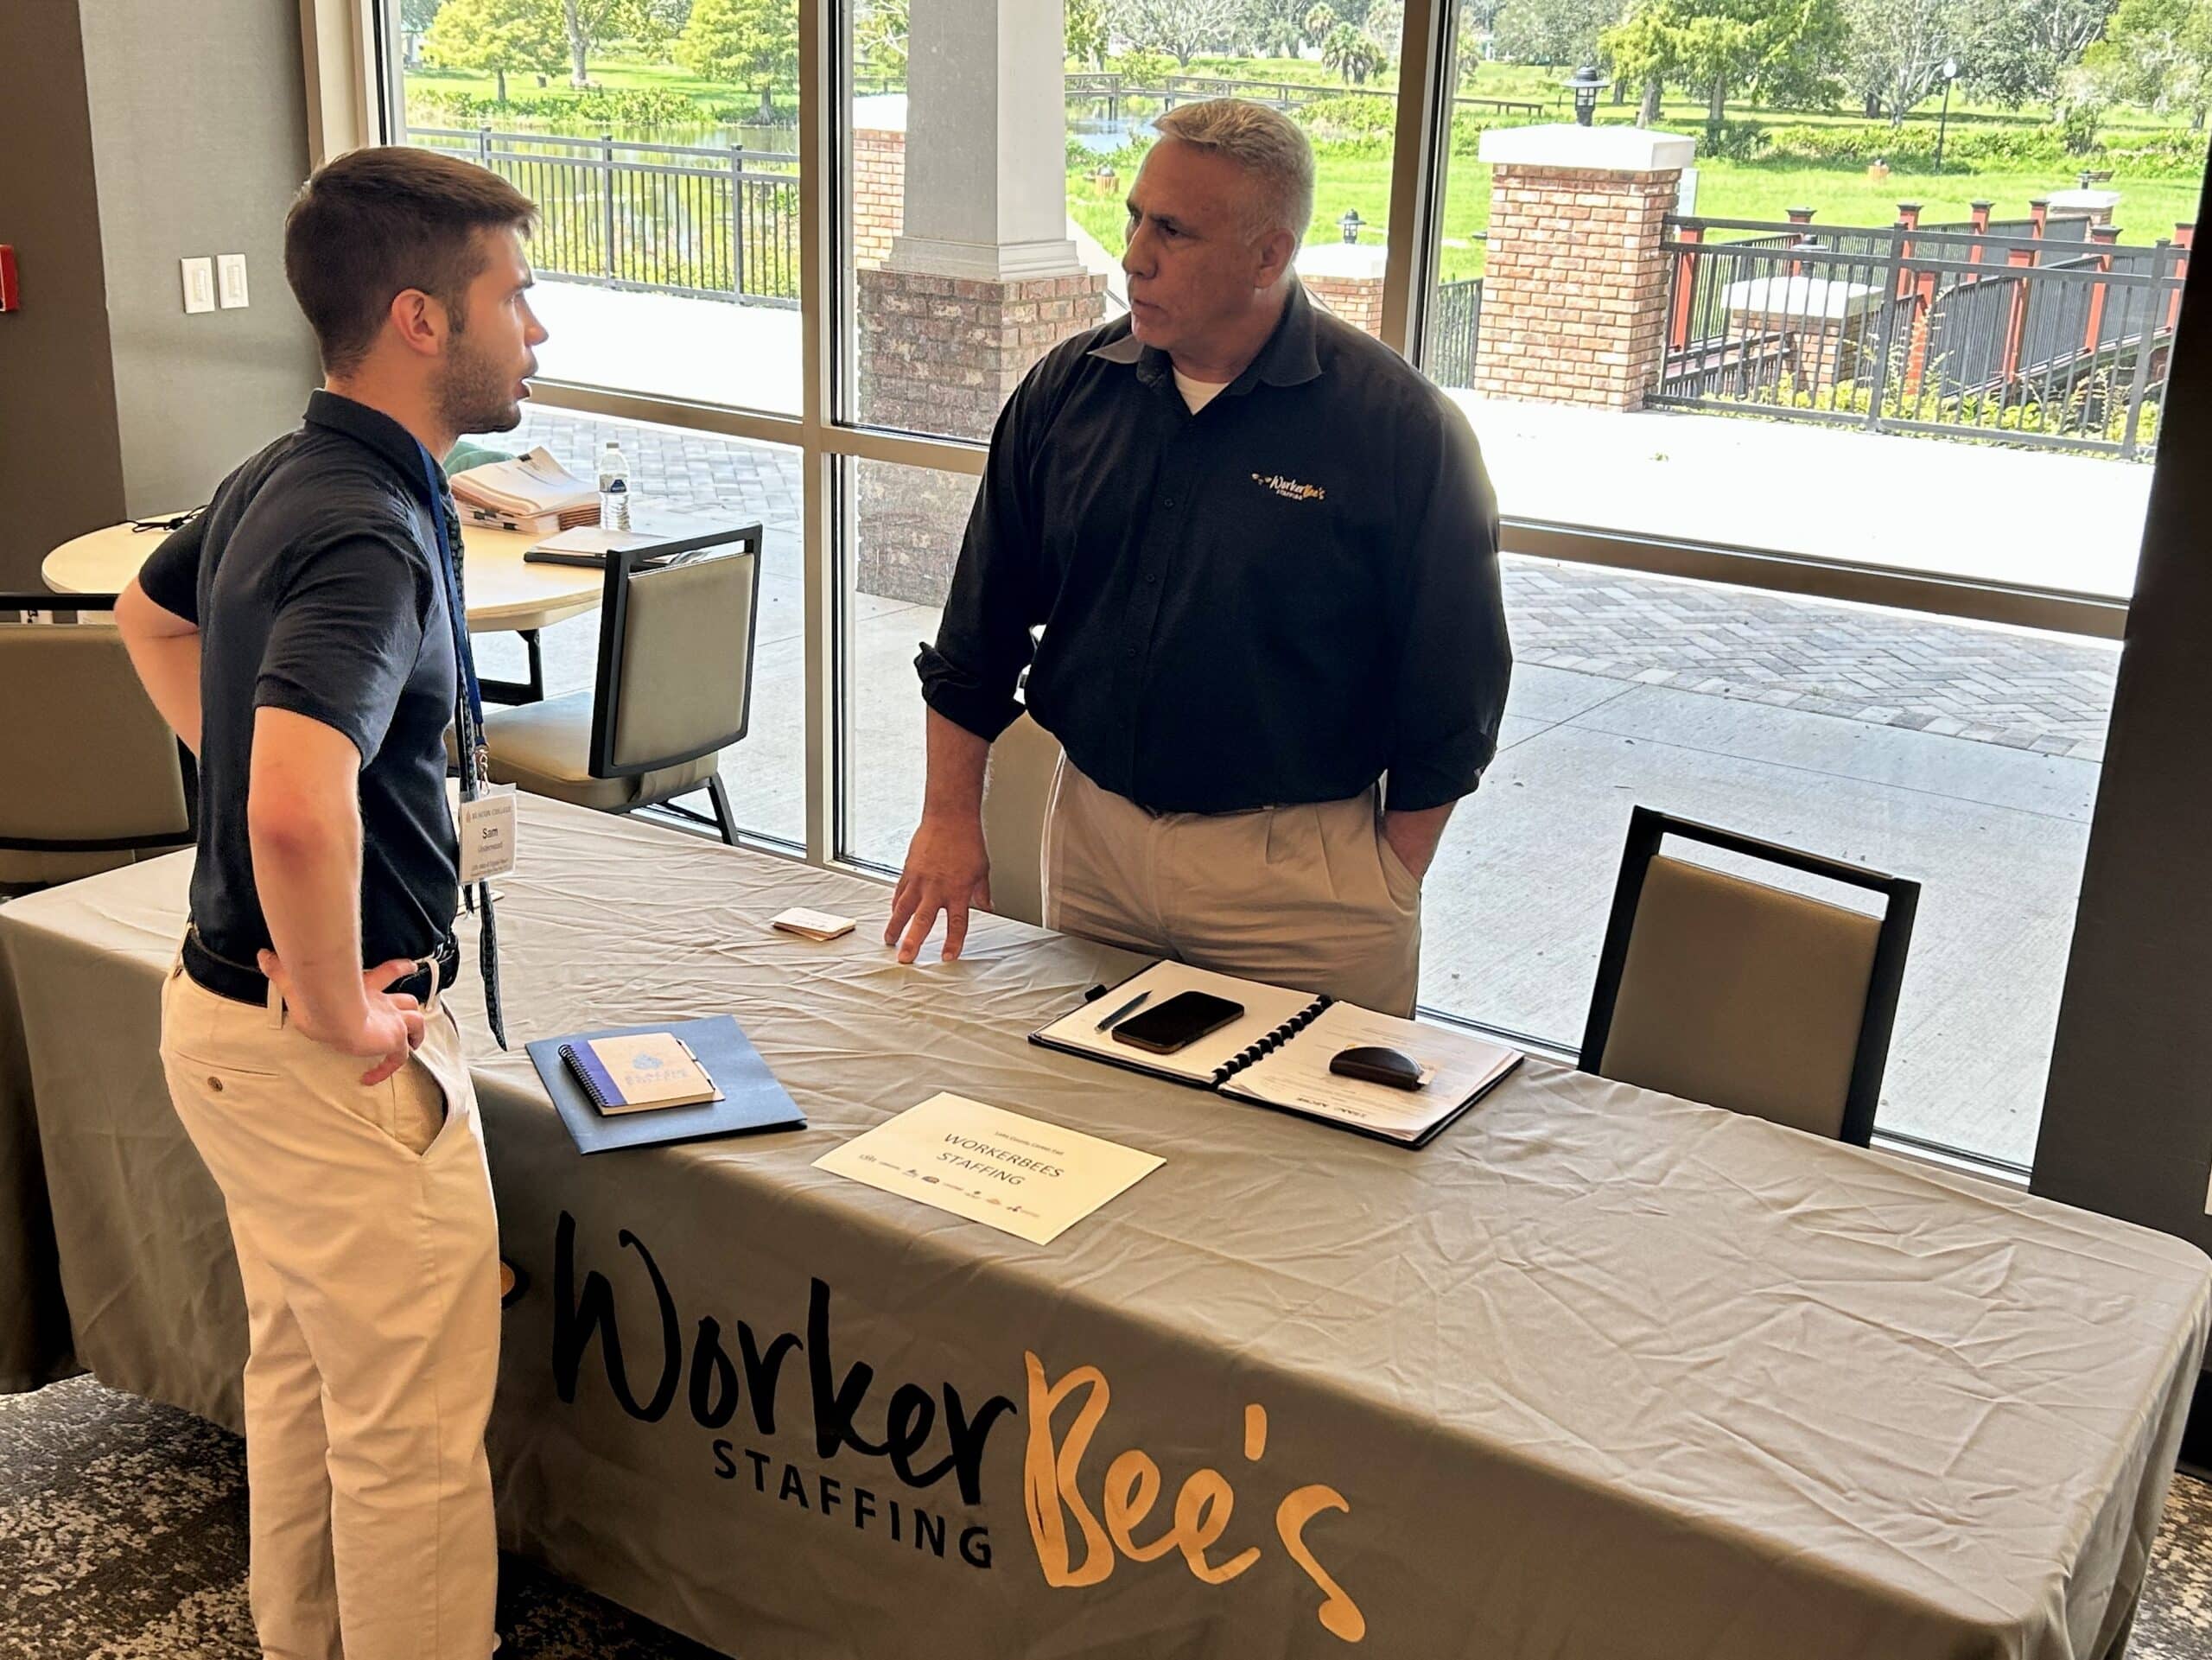 Worker Bee's meeting with a student at a convention